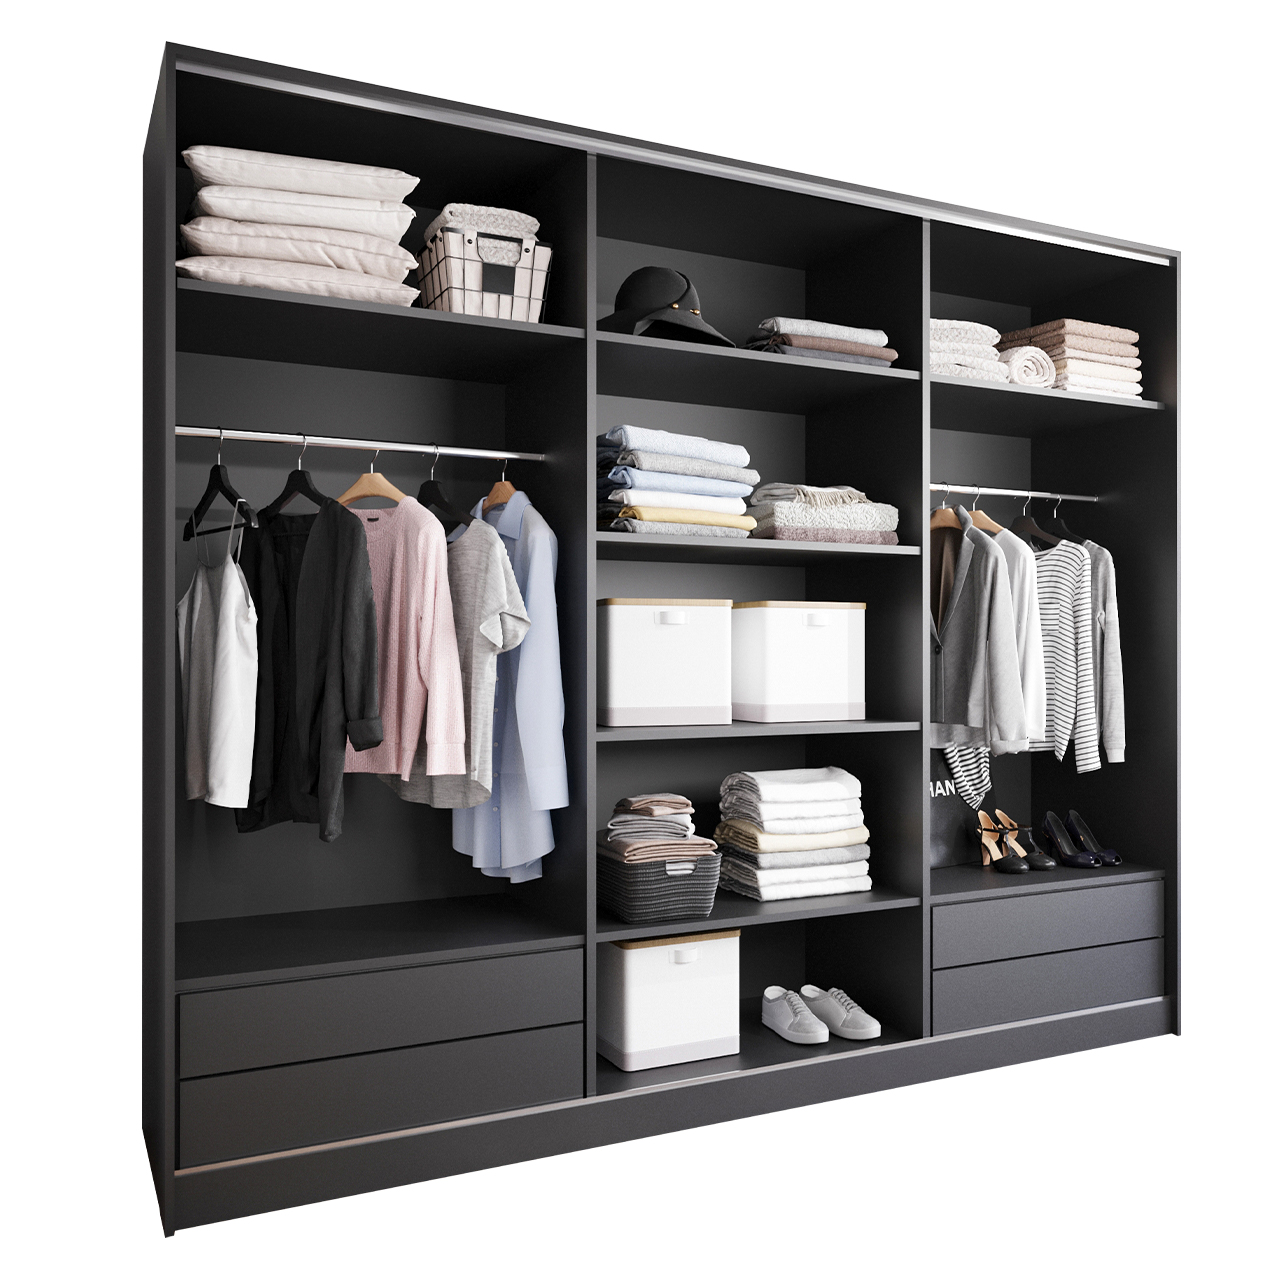 Sliding Wardrobe with Mirror and Drawers GRANO D 250 black